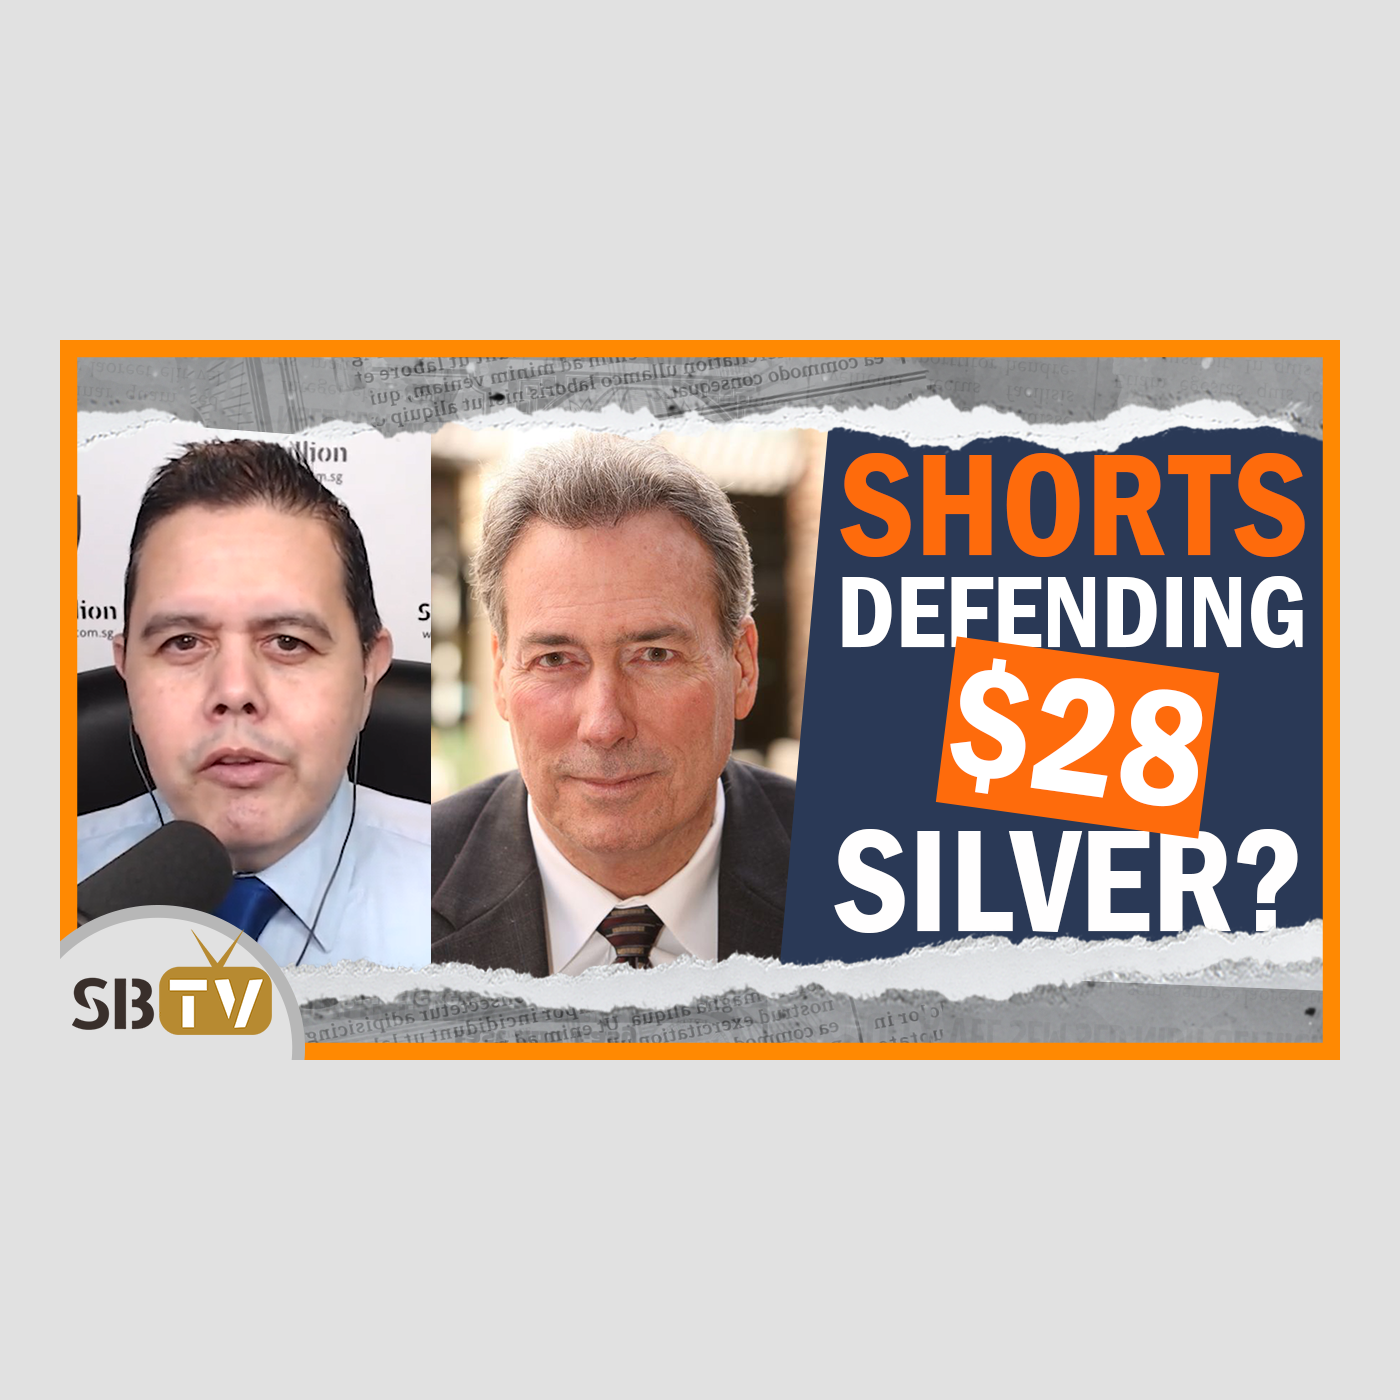 172 David Morgan - Shorts Near $28 Silver Defending the Line Until They Can Unwind